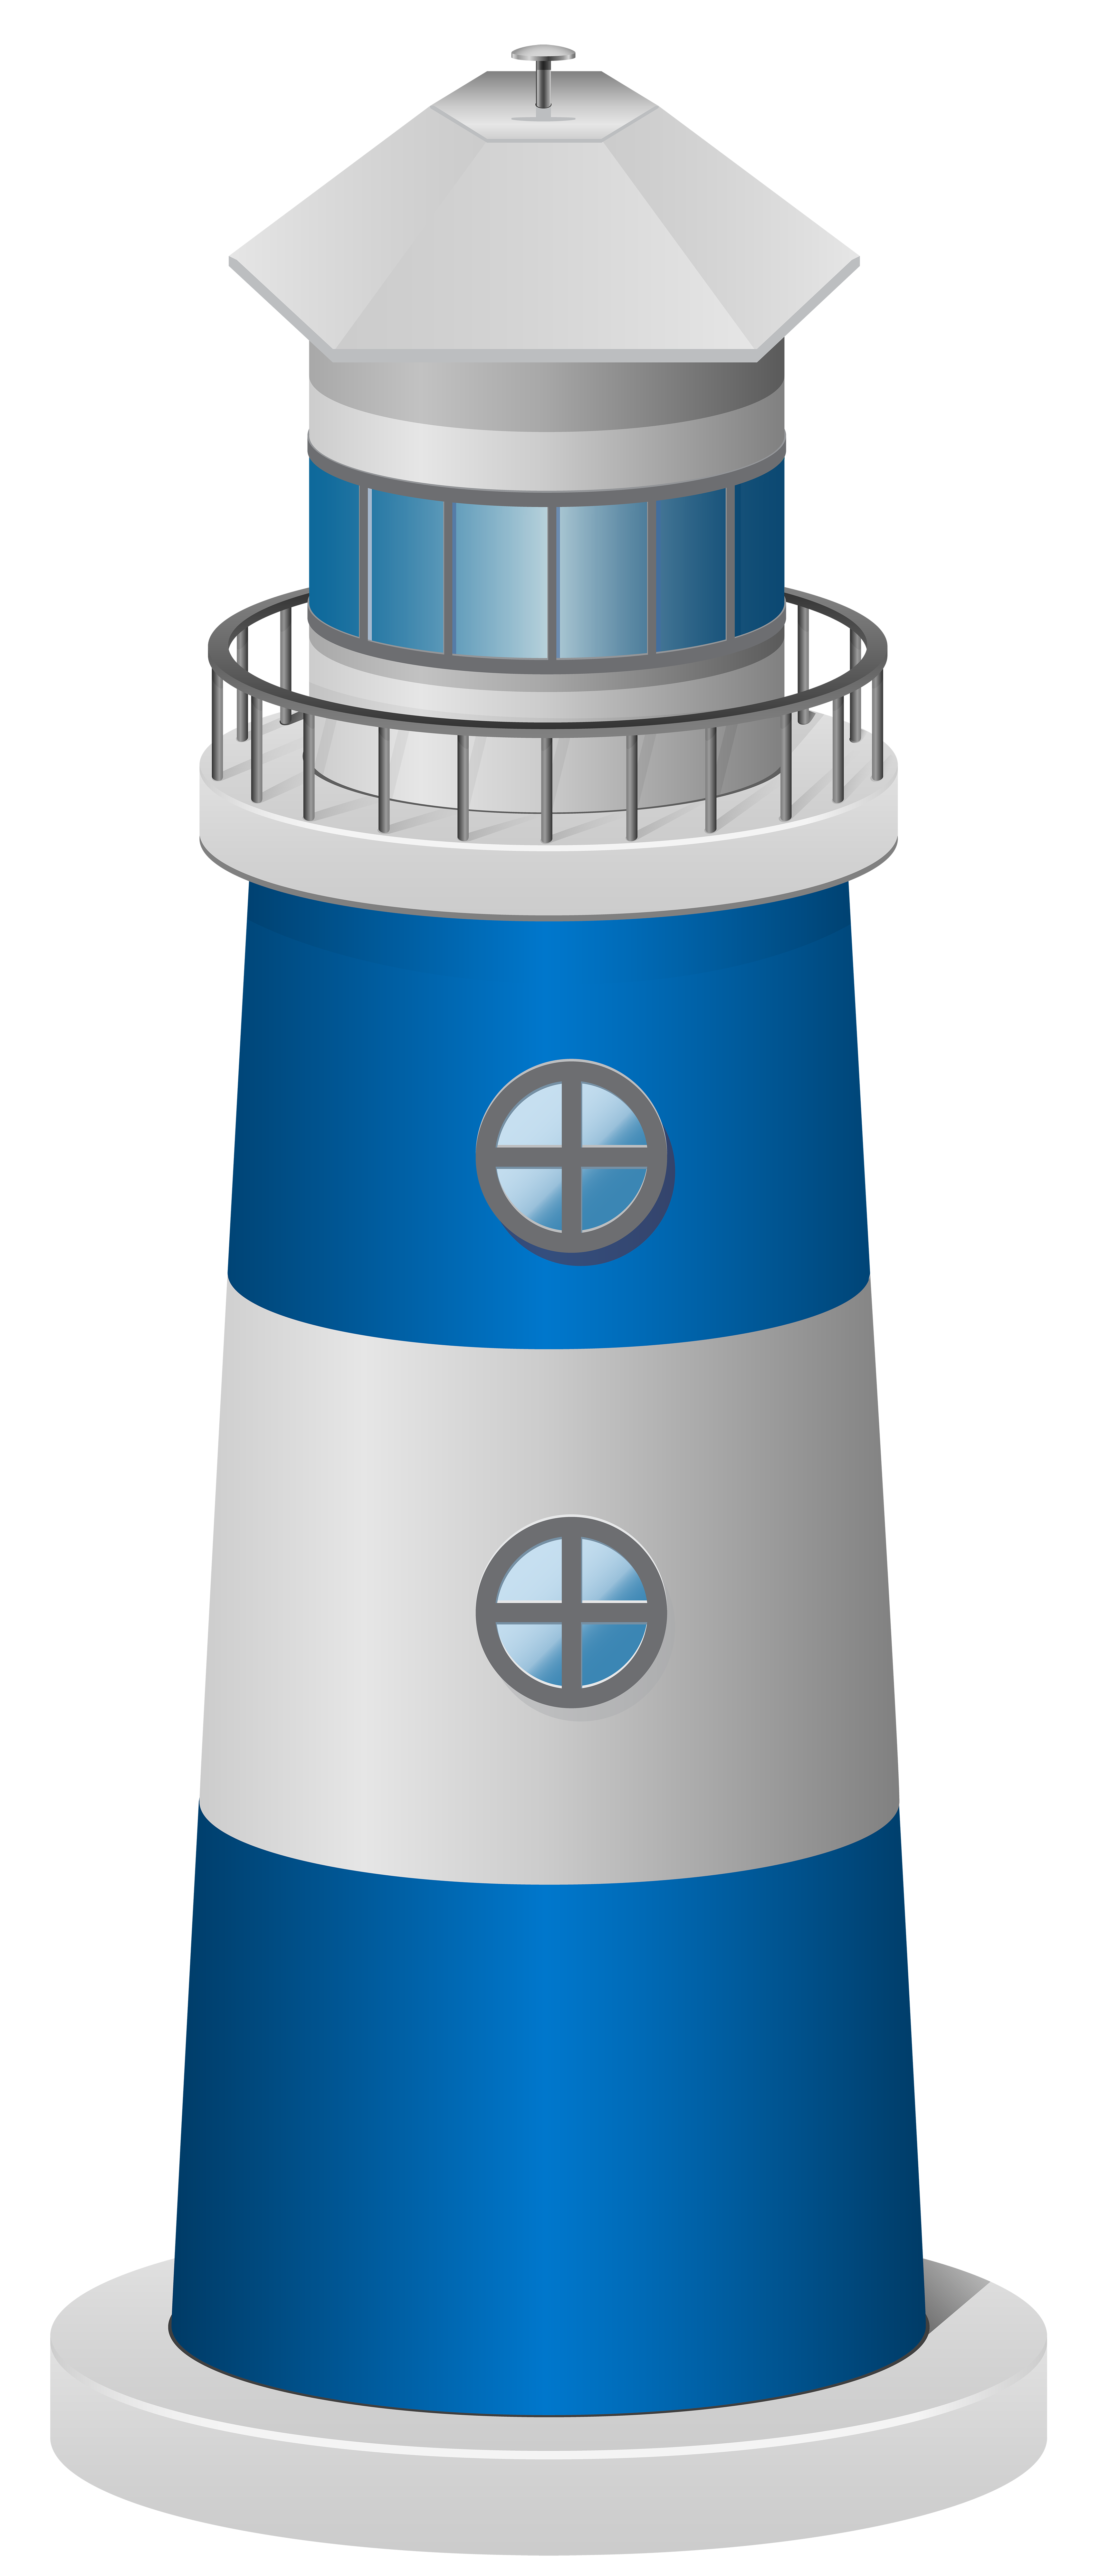 Lighthouse clipart blue lighthouse Lighthouse blue lighthouse Transparent FREE for download on